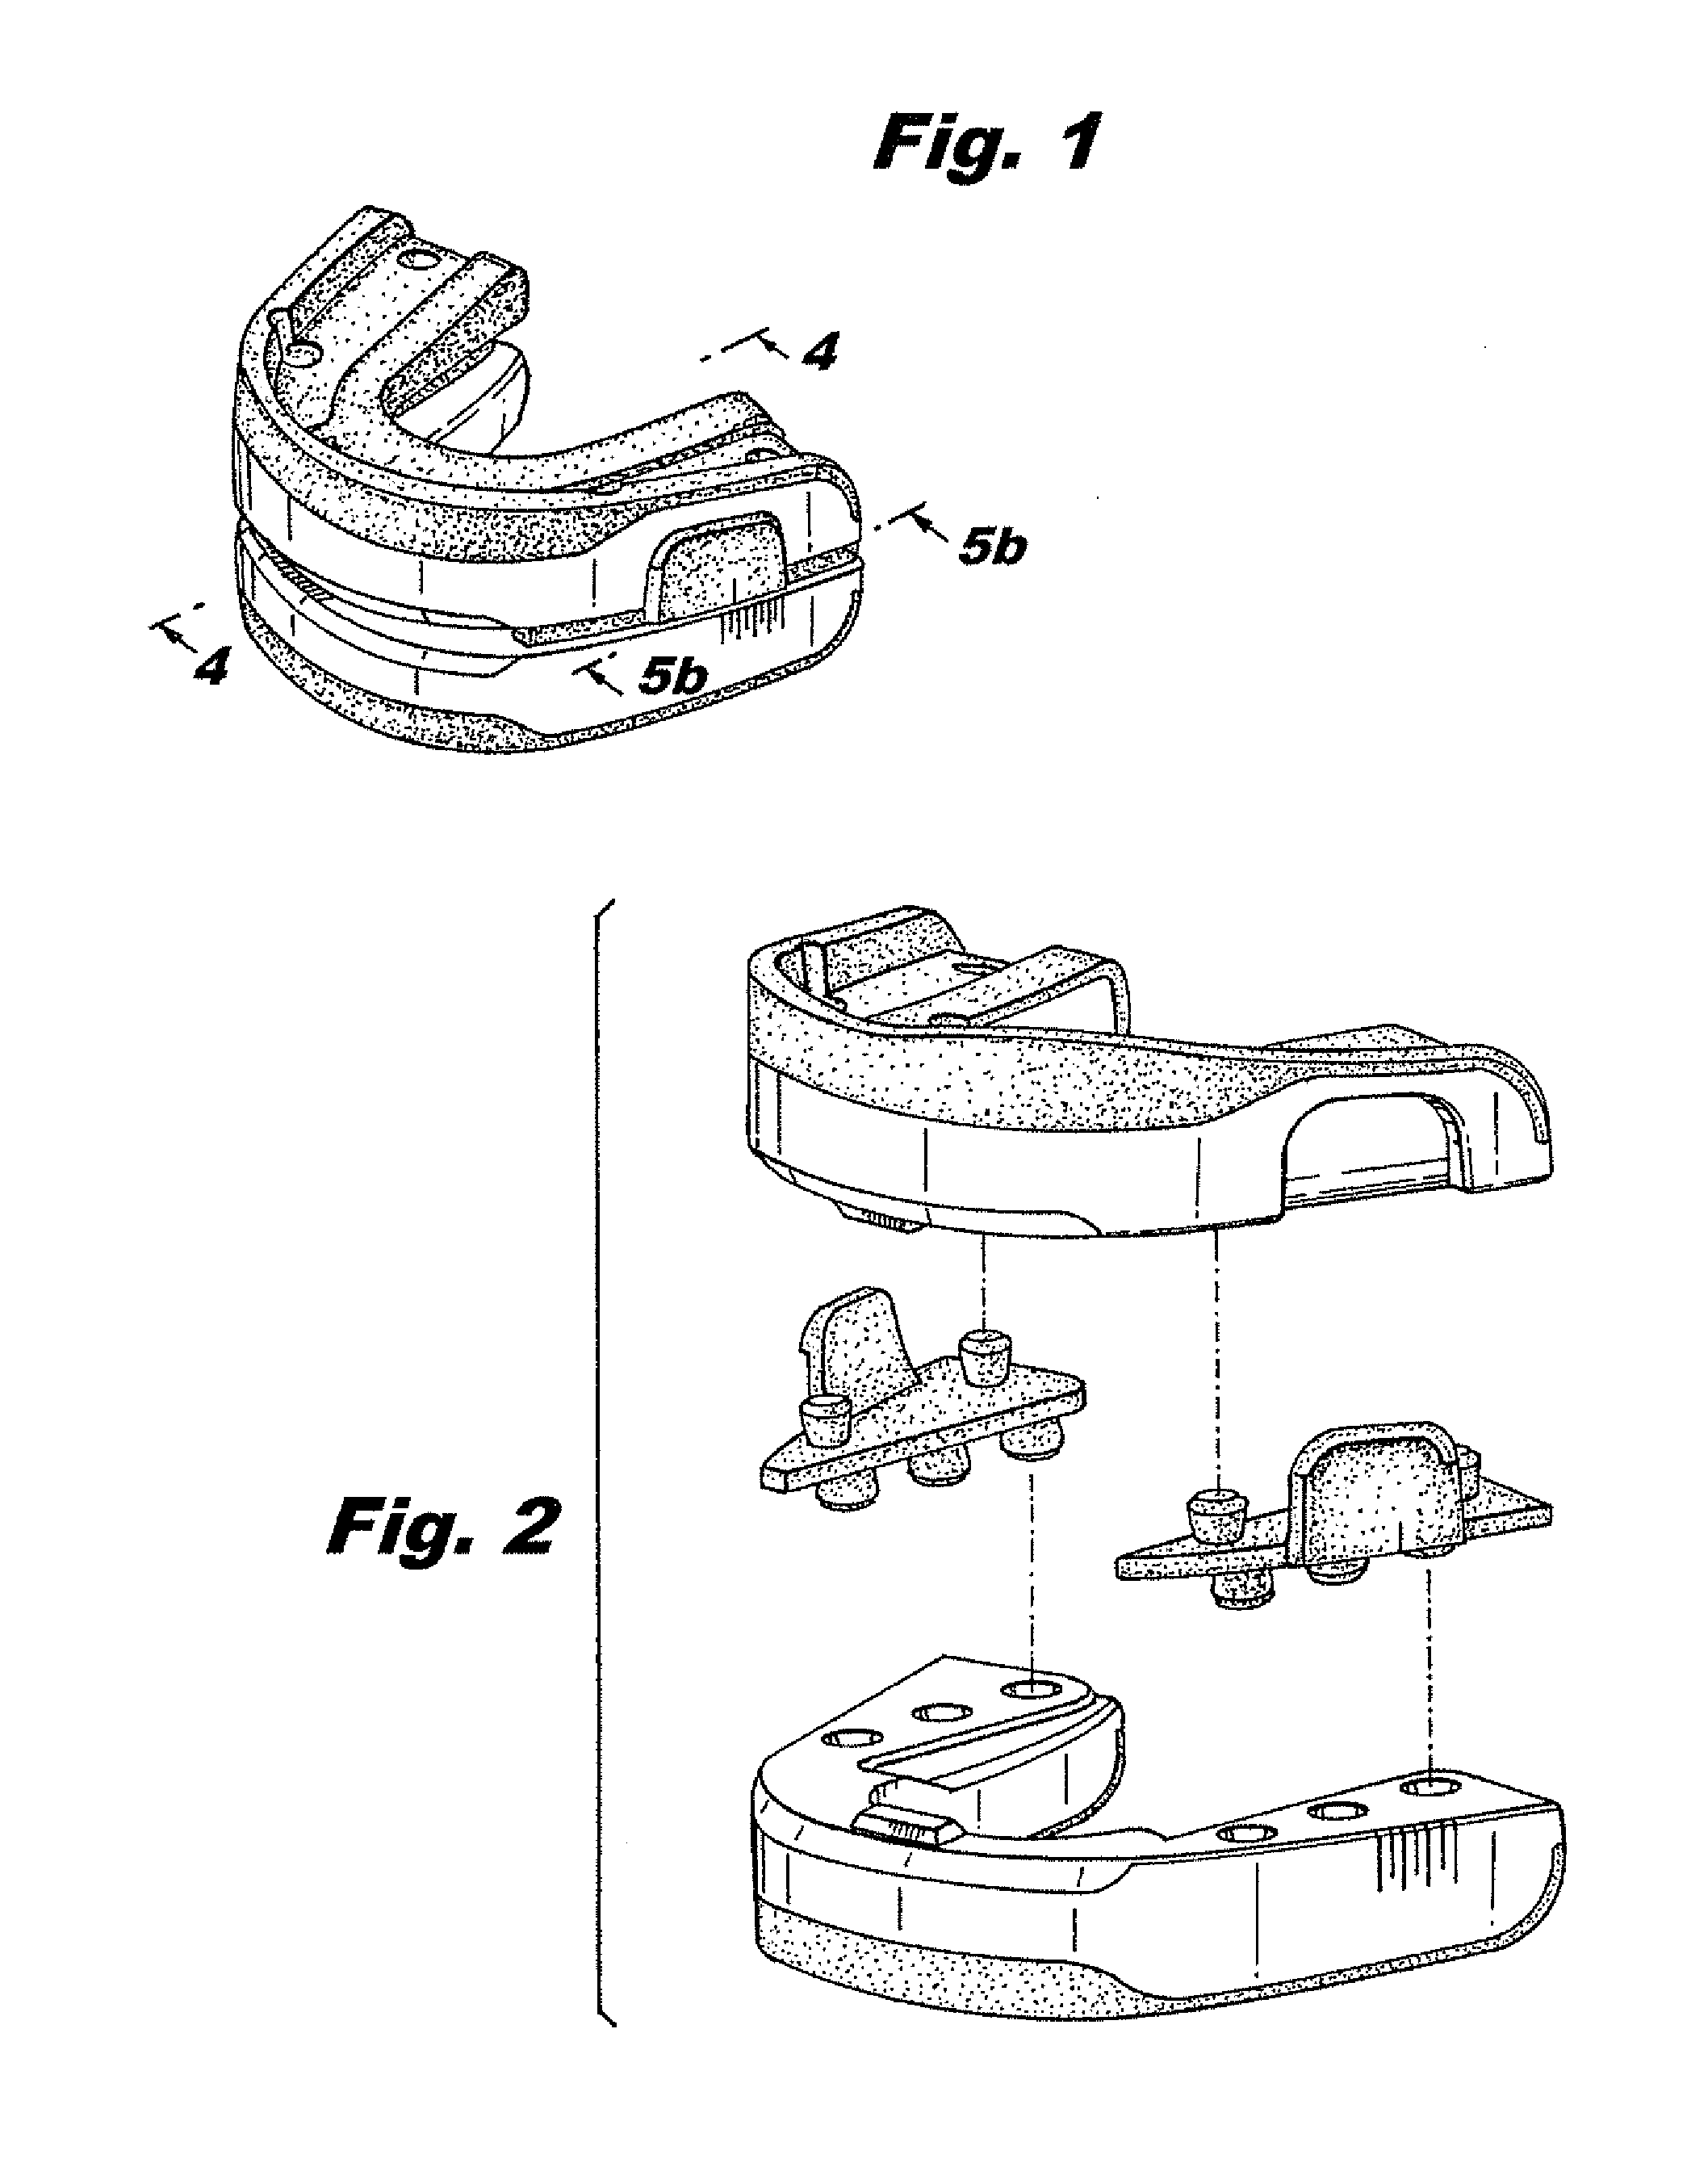 Apparatus and kit for an oral appliance and method for using same